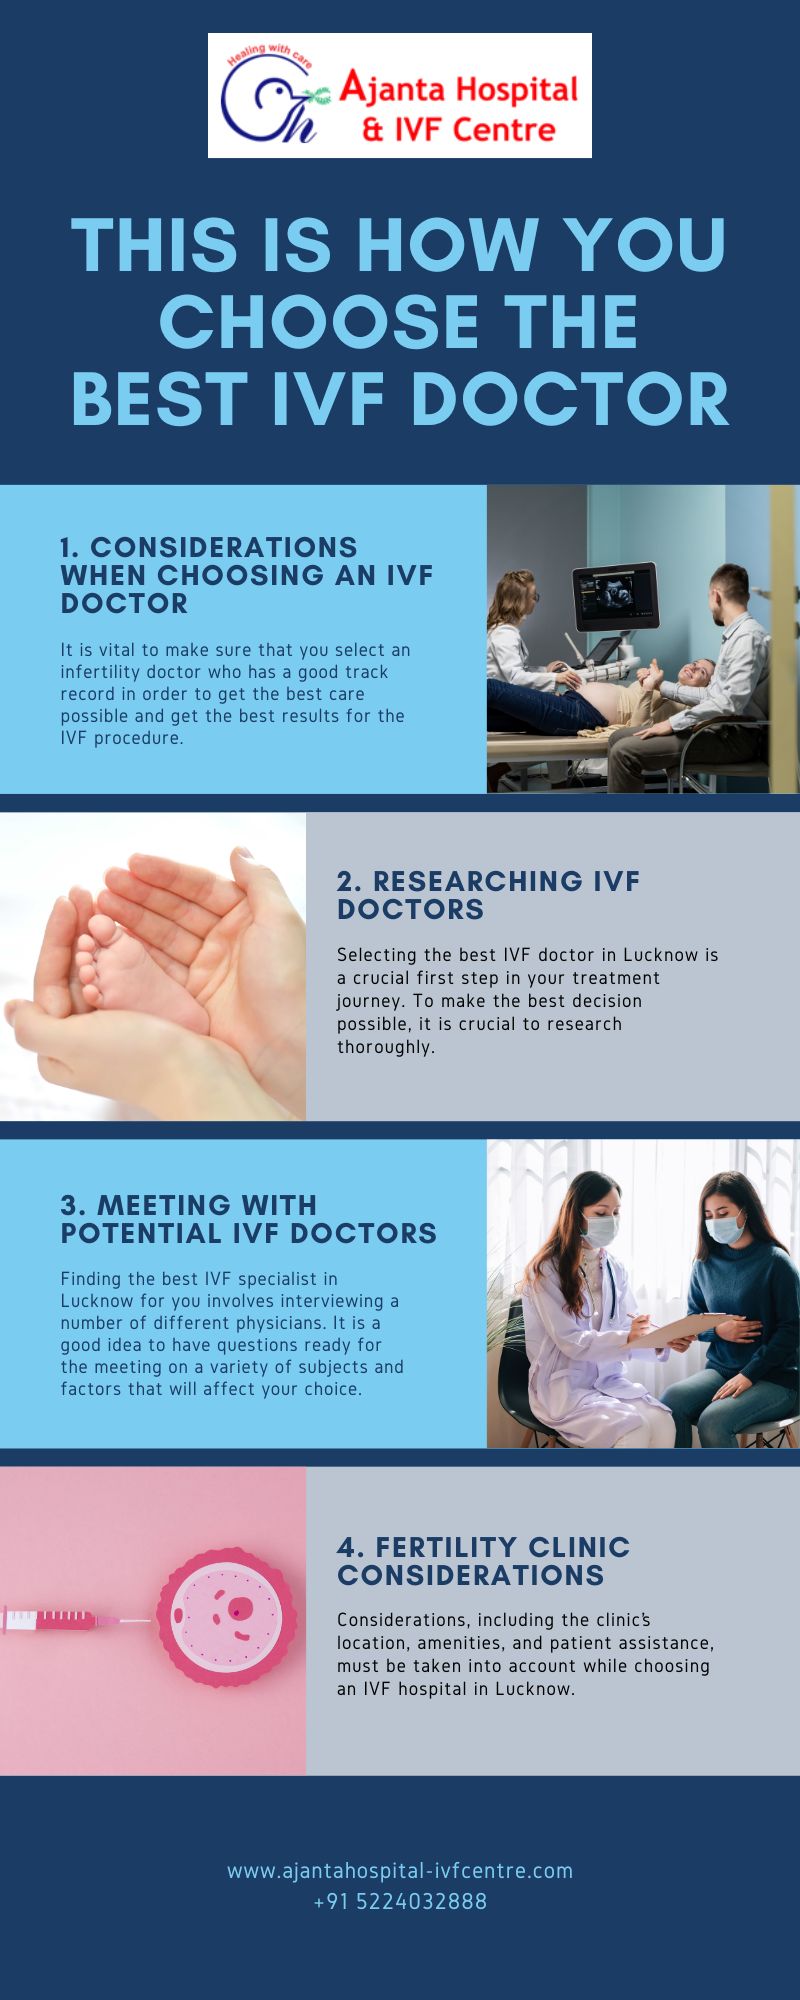 This is How you choose the best IVF Doctor